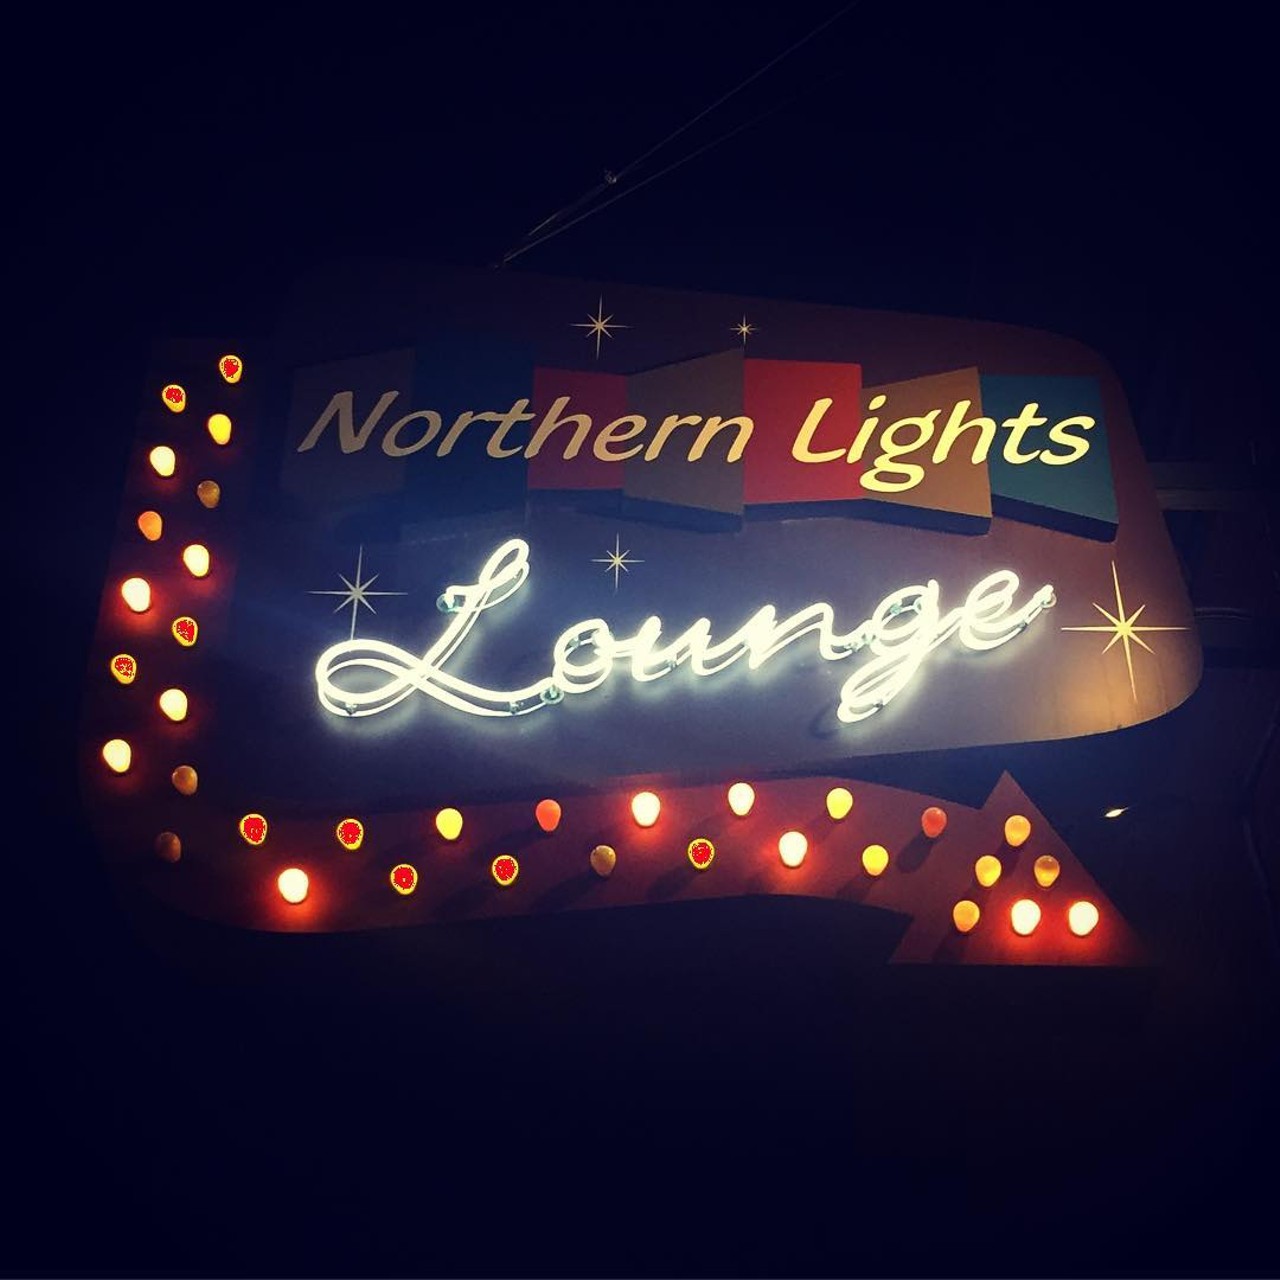 Northern Lights Lounge
660 W Baltimore St, Detroit
(313)-873-1739
With a great happy hour ($2 domestic bottles!) and an awesome outdoor patio, escape the political landscape in this cute little bar.
Photo via IG user @daizylibra